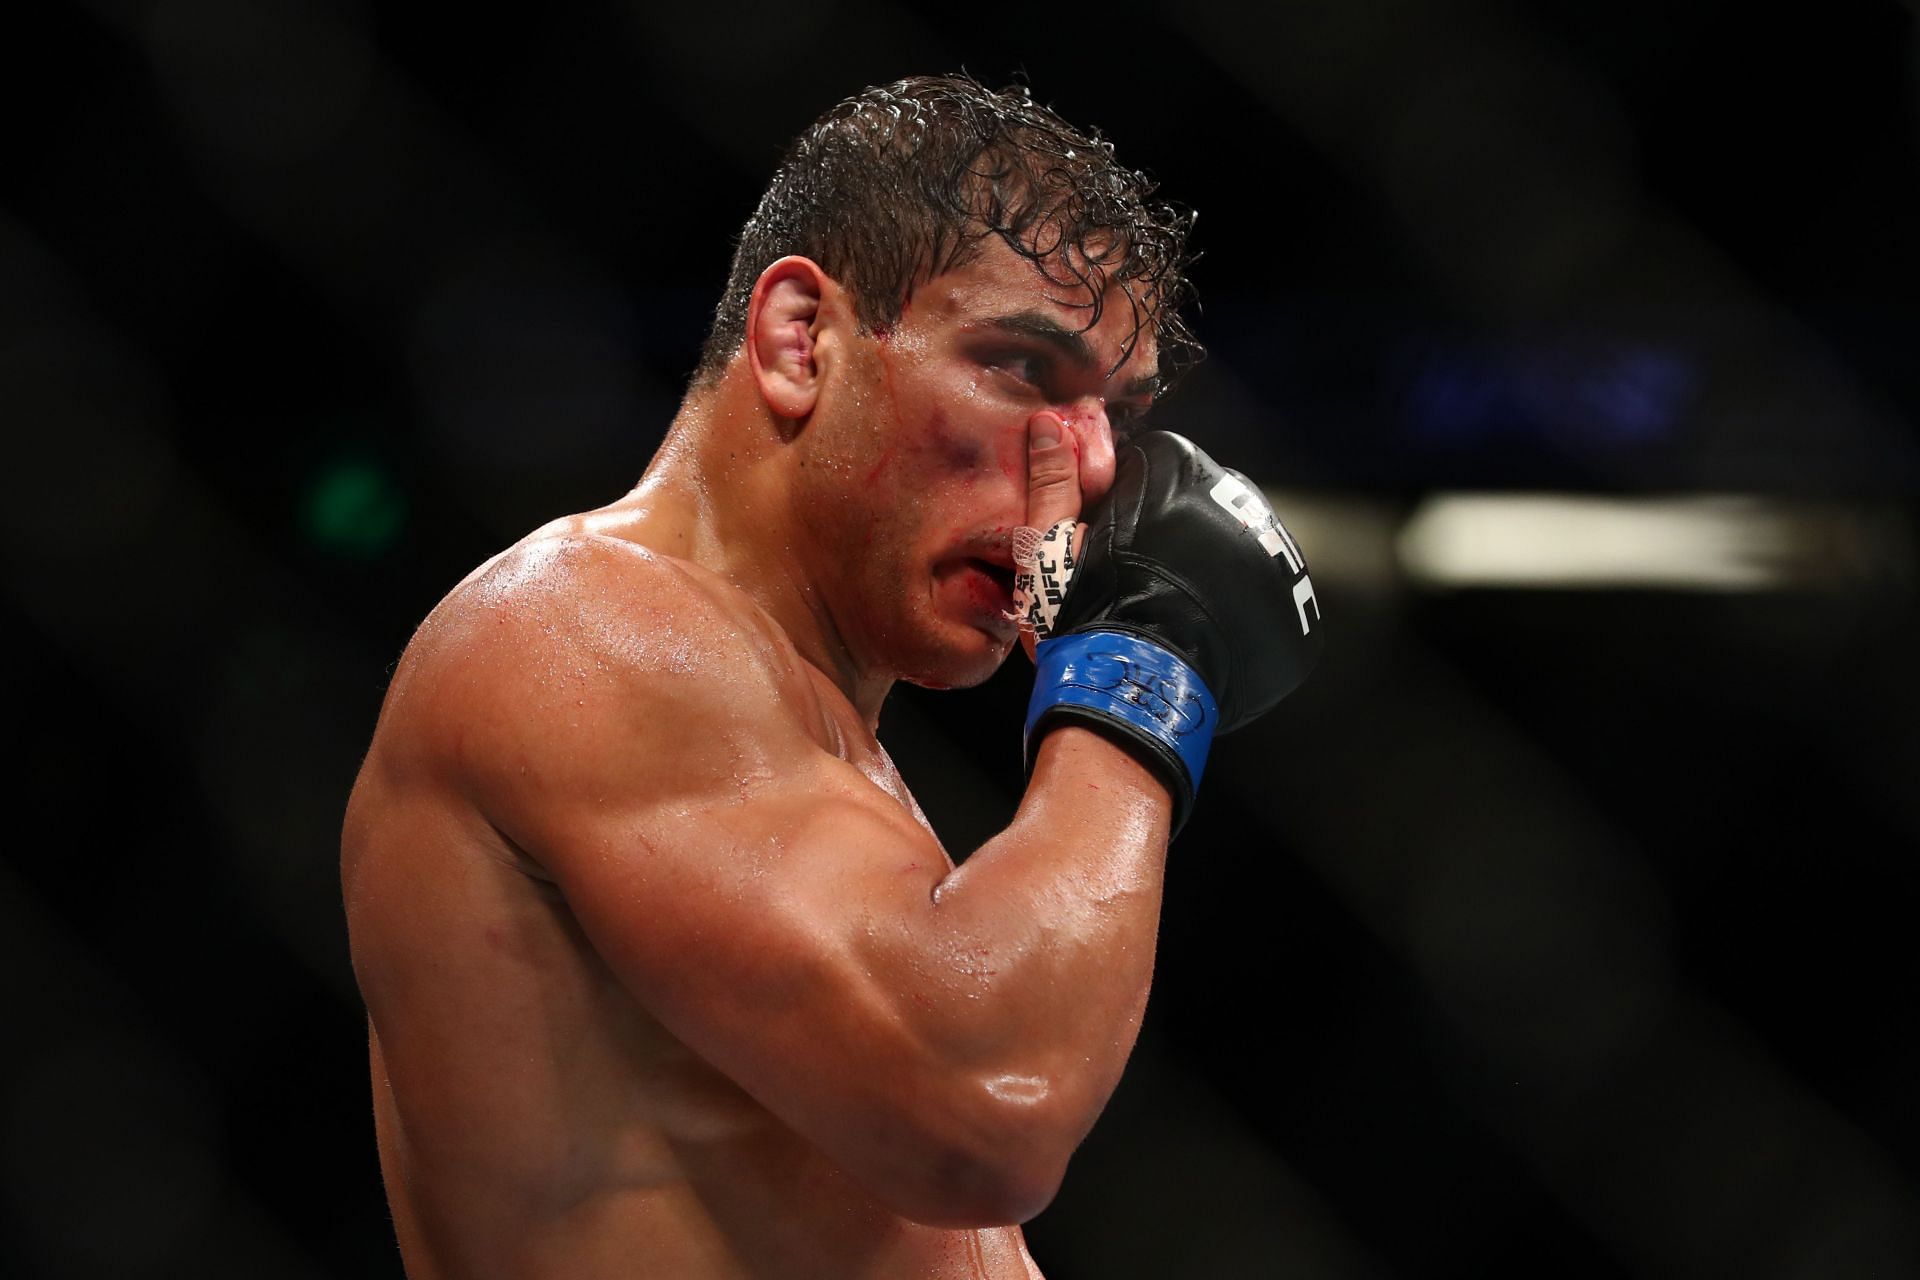 Paulo Costa holds a record of 13-2